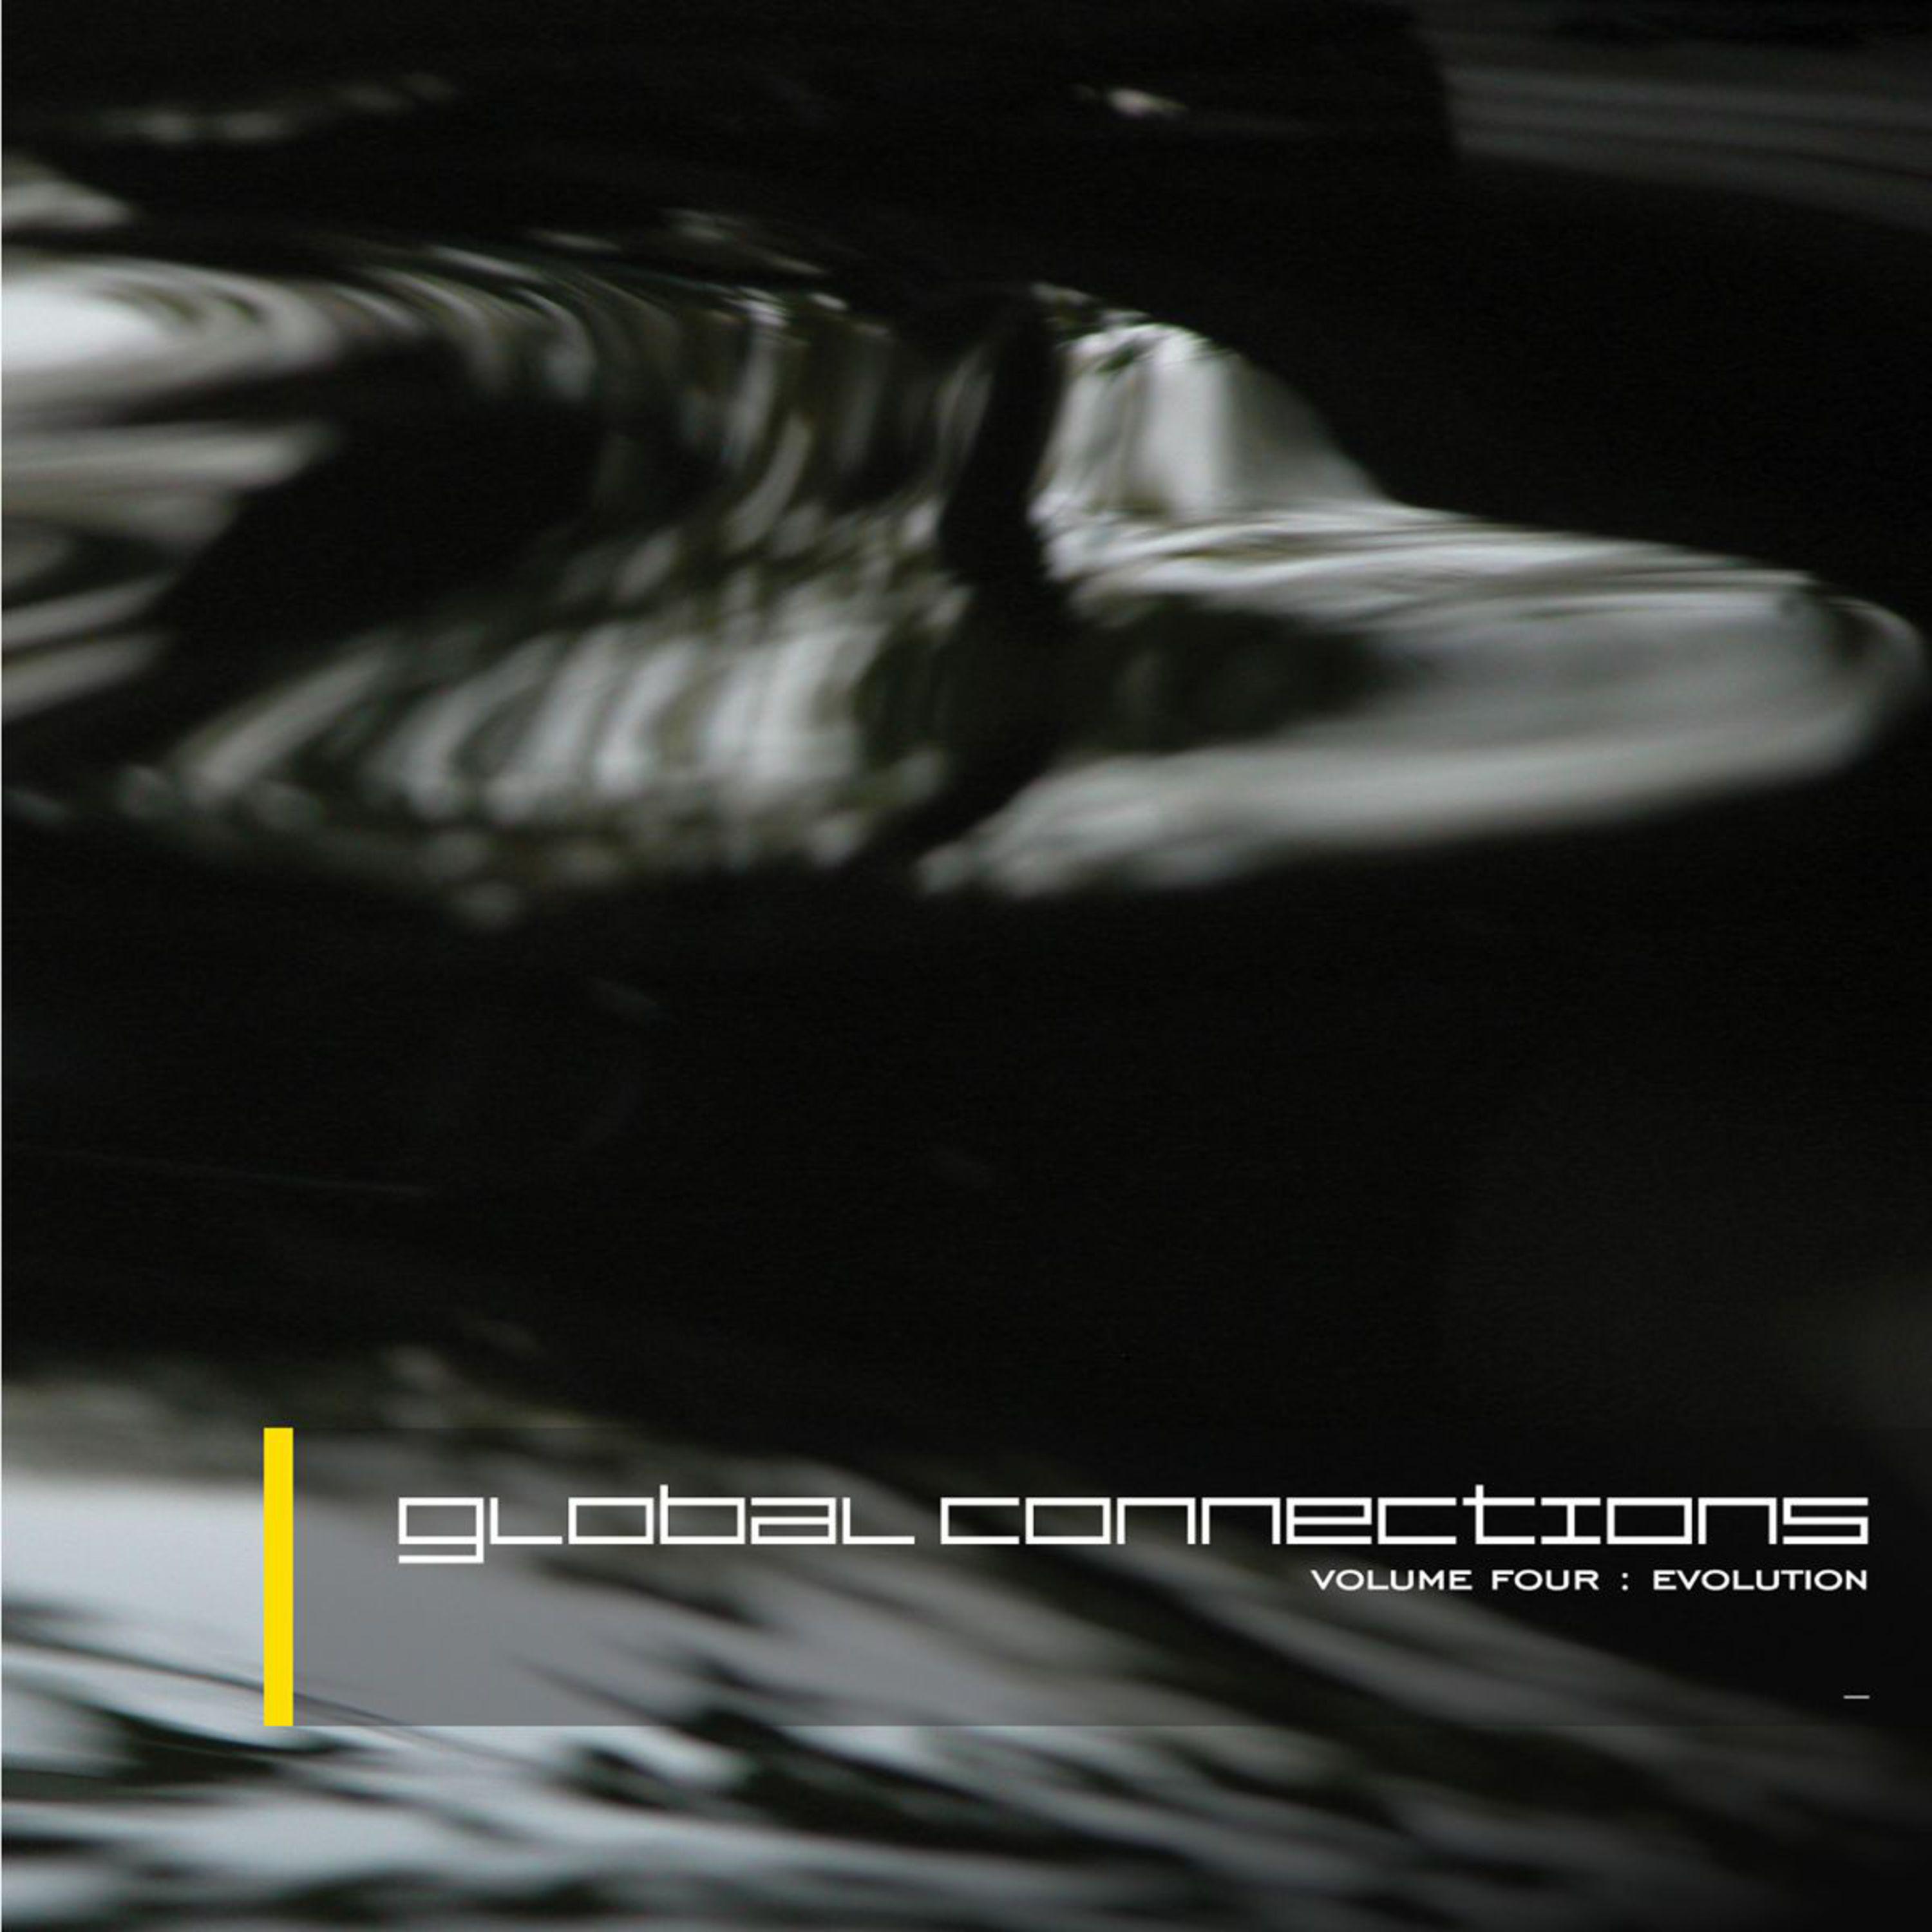 Global Connections - Volume 4 - Evolution